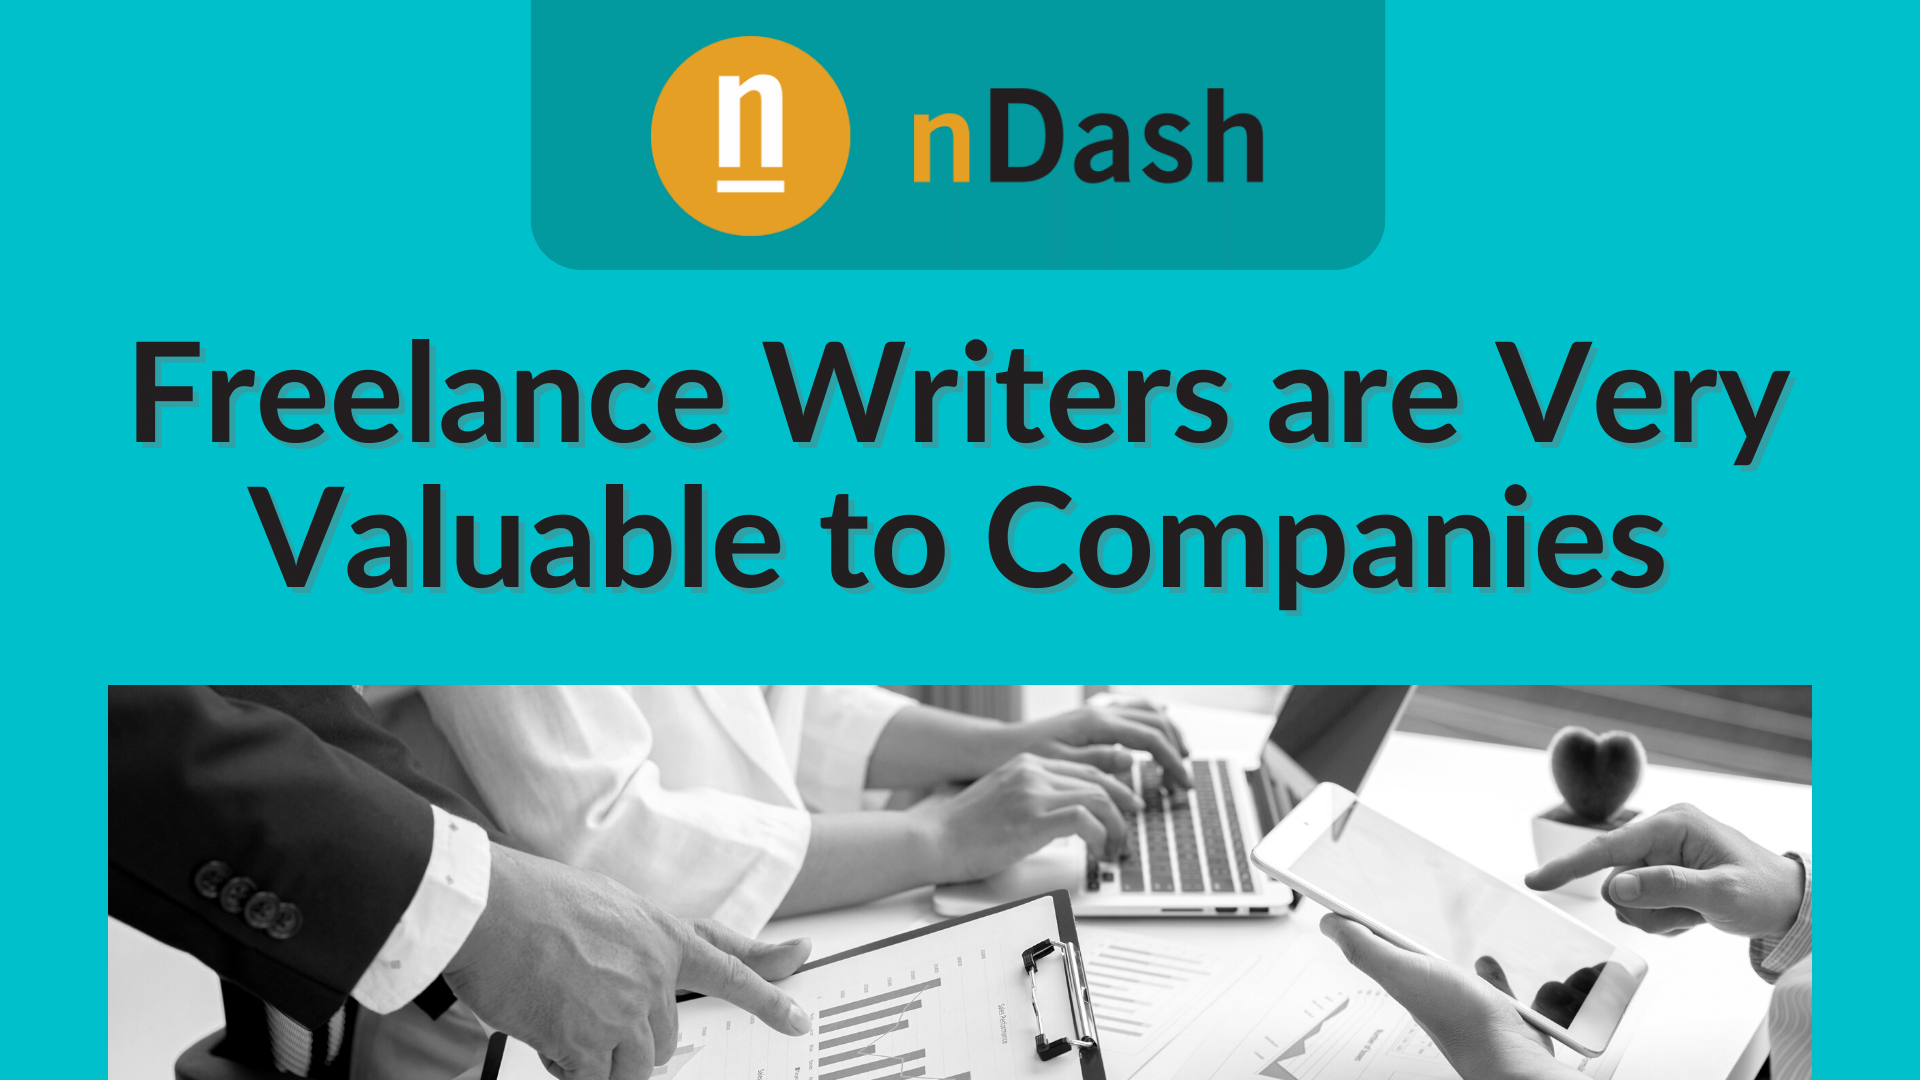 Freelance Writers are Very Valuable to Companies